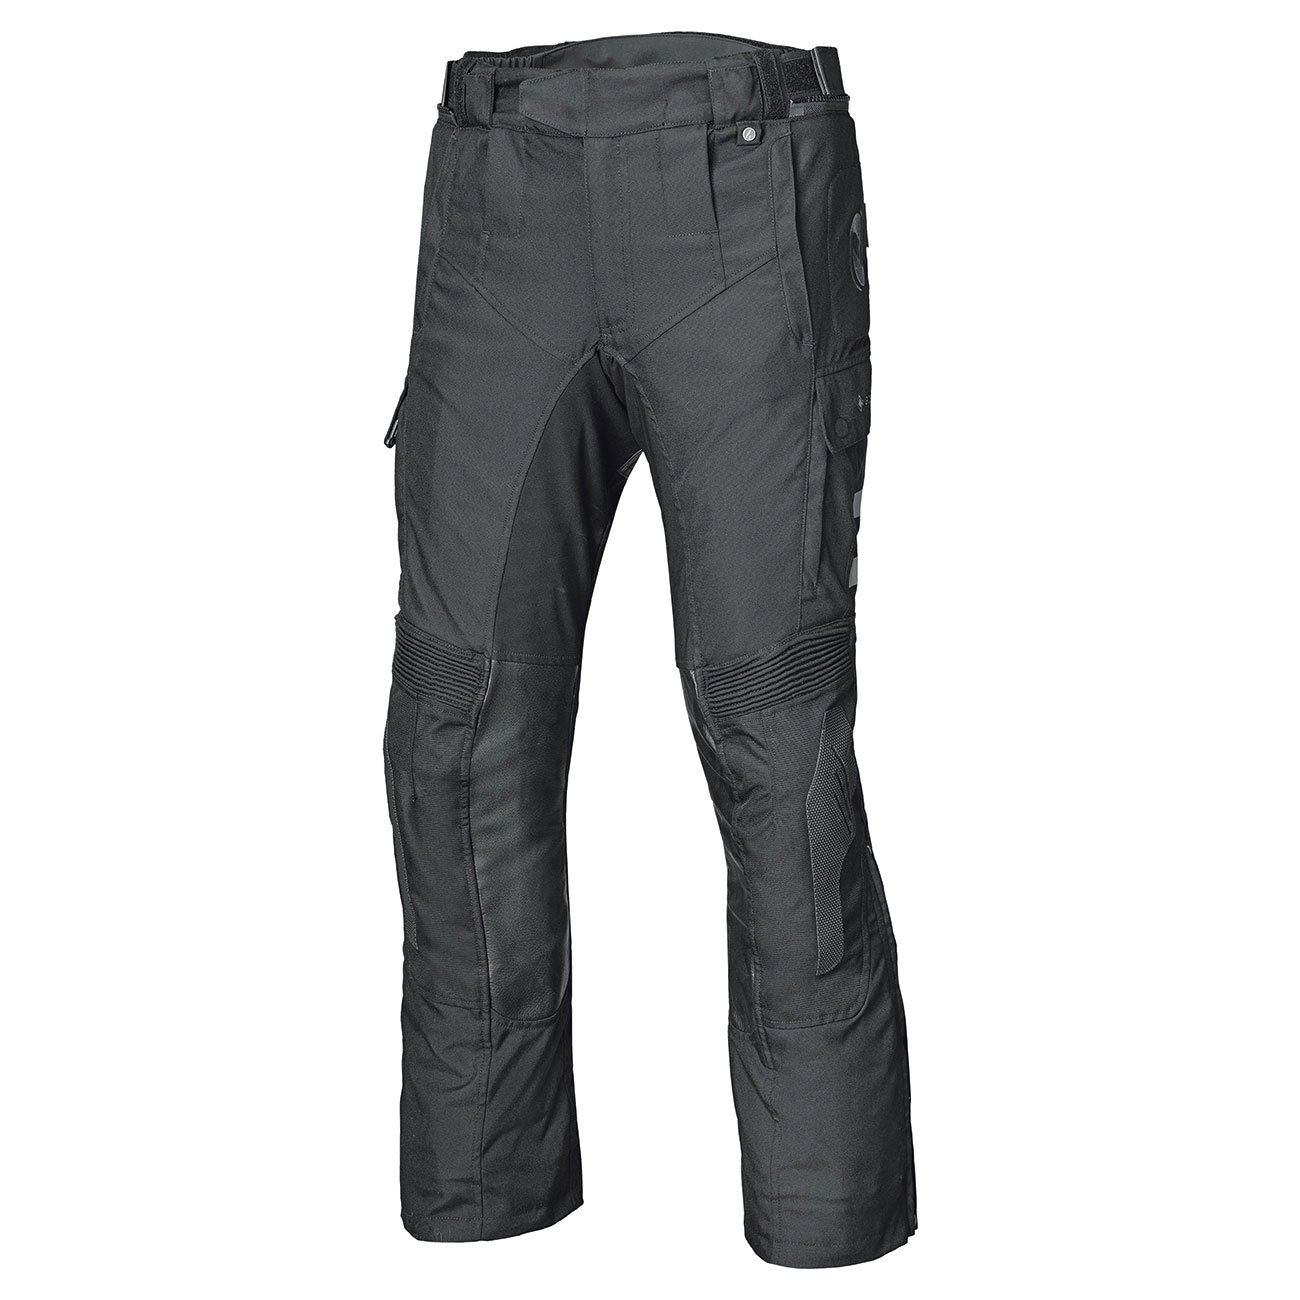 Image of Held Torno Evo Gore Tex® Touring Pants Black Size 3XL ID 4049462891883